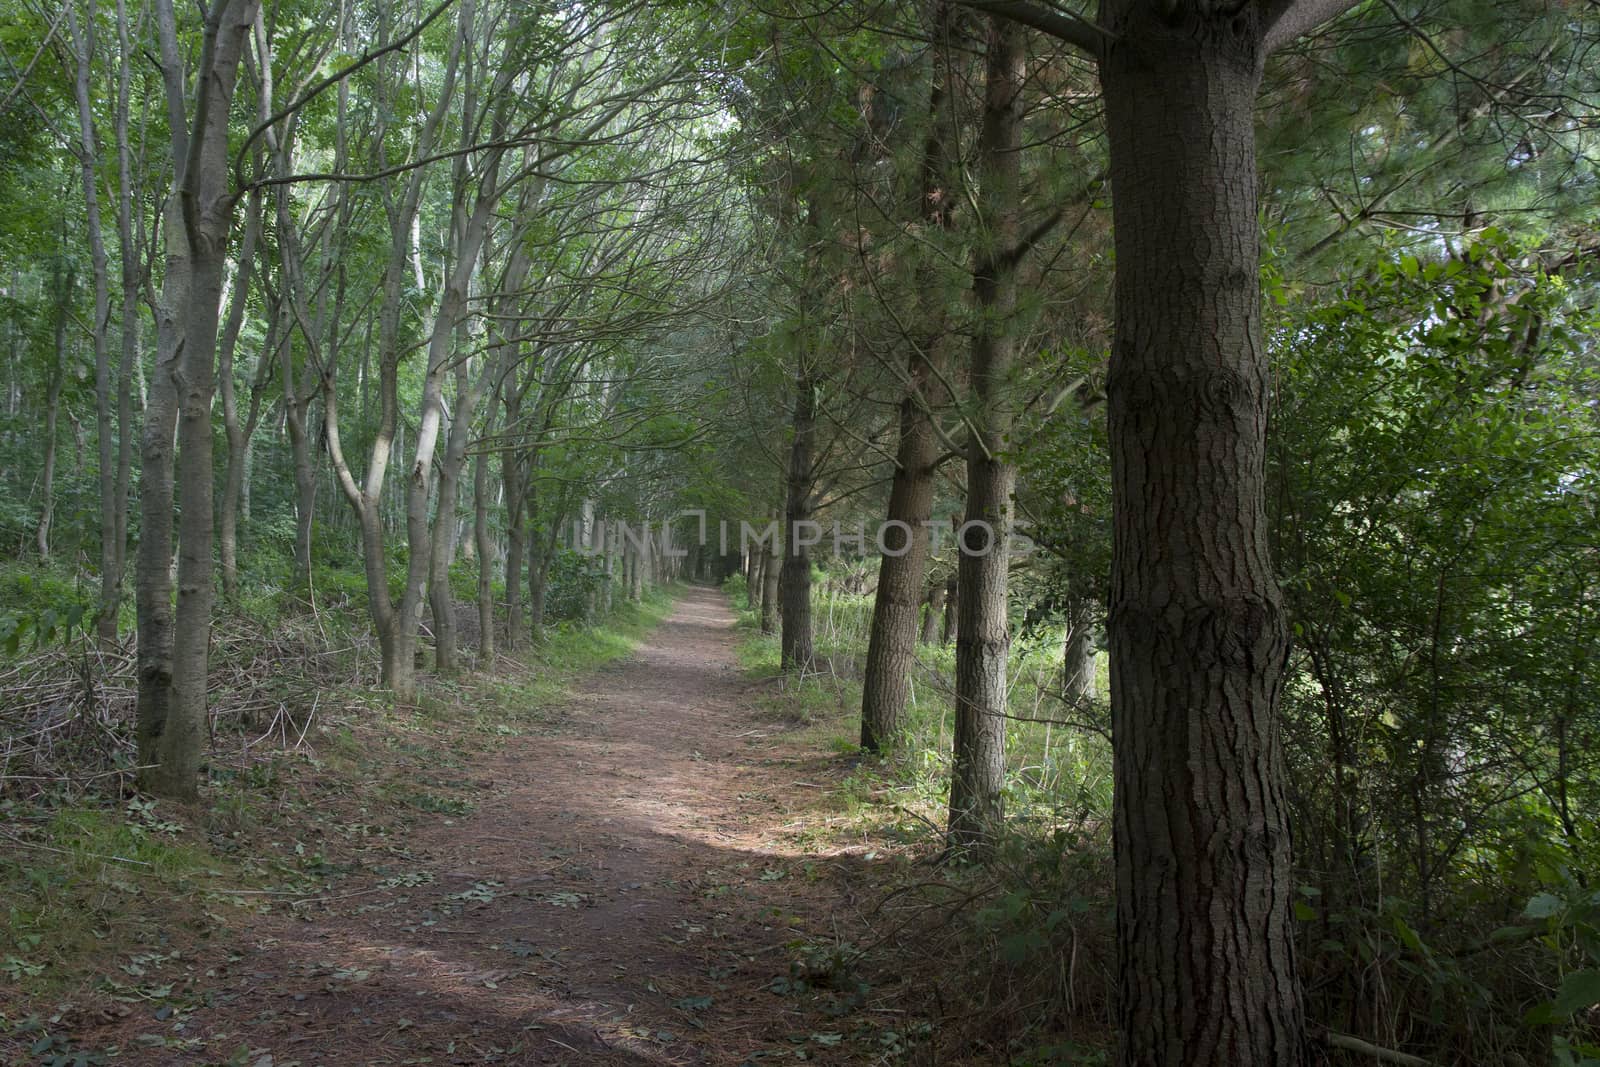 Peaceful forest path on an early autumn day